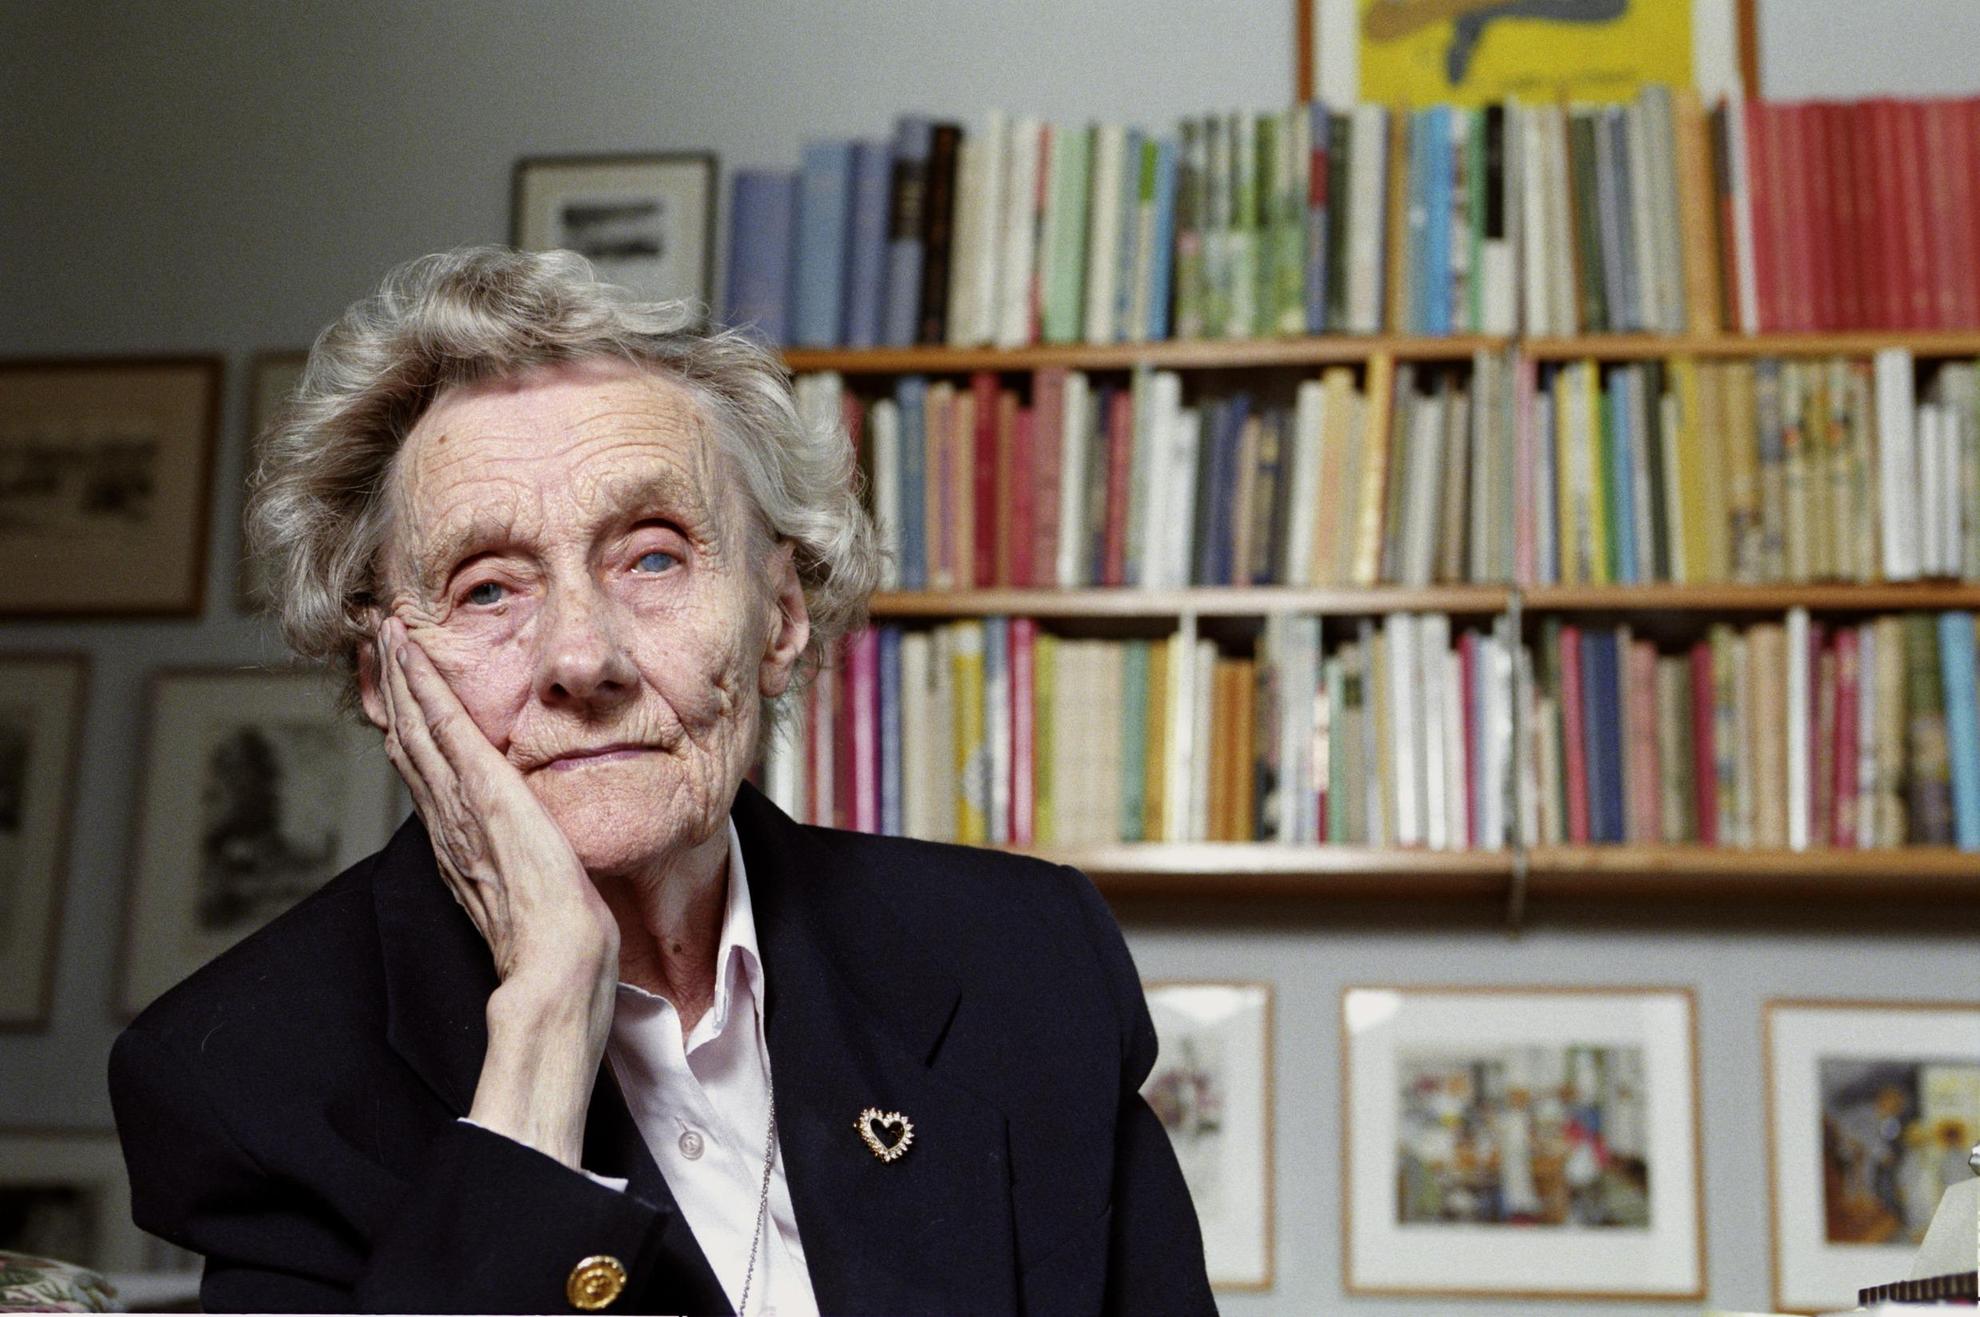 Portrait of author Astrid Lindgren in front of a book shelf.